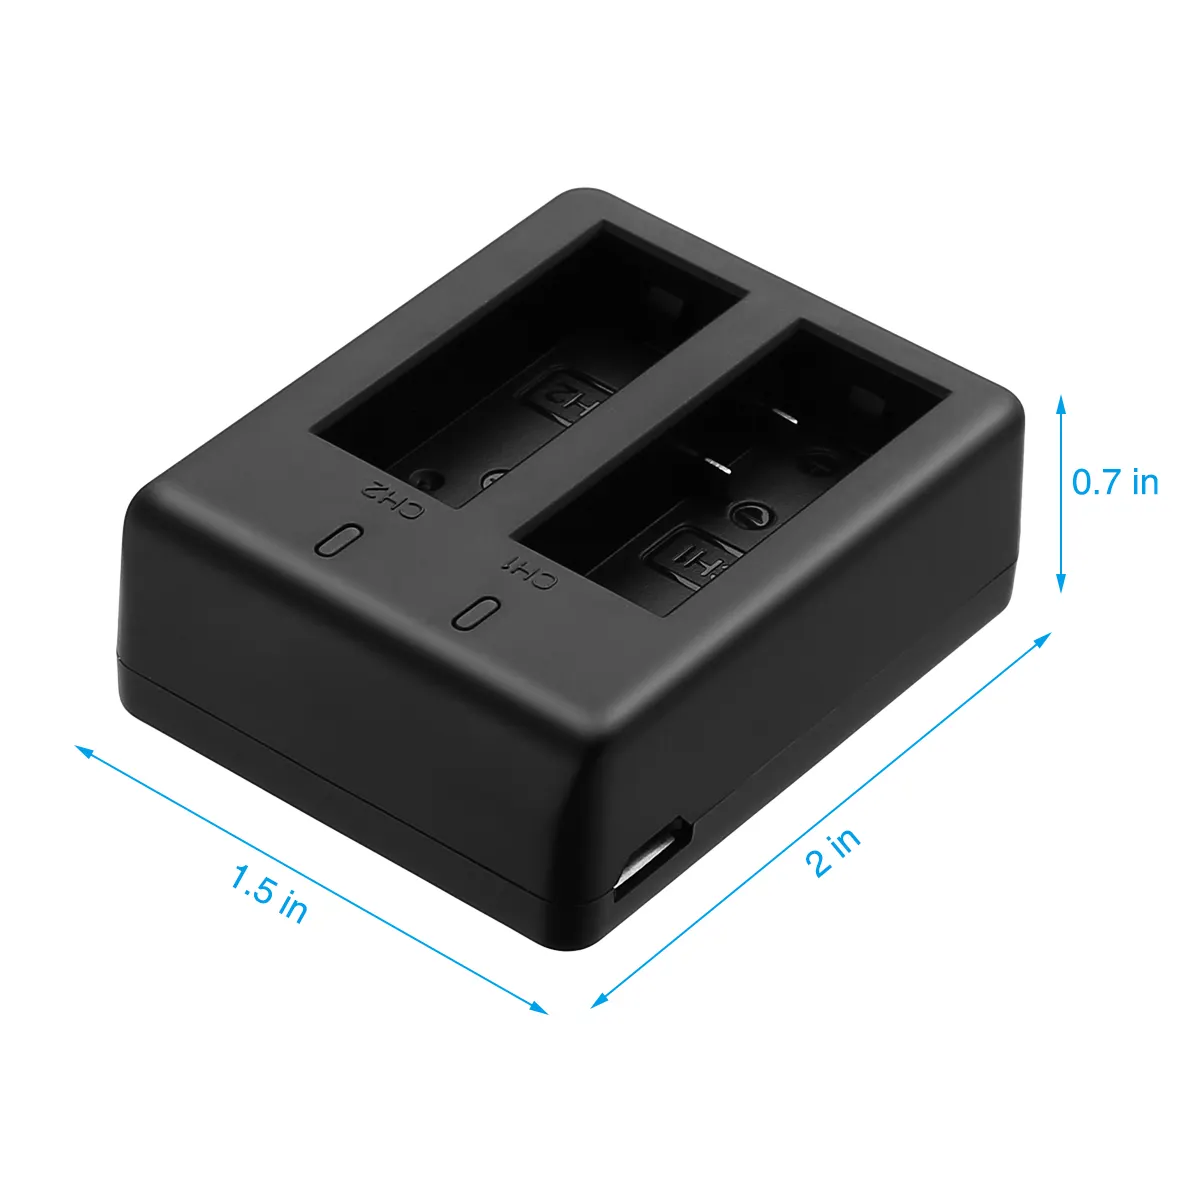 2 Slots Rechargeable Lithium ion Battery SJ4000B Dual USB Charger For SJ4000B Sport Camera Battery